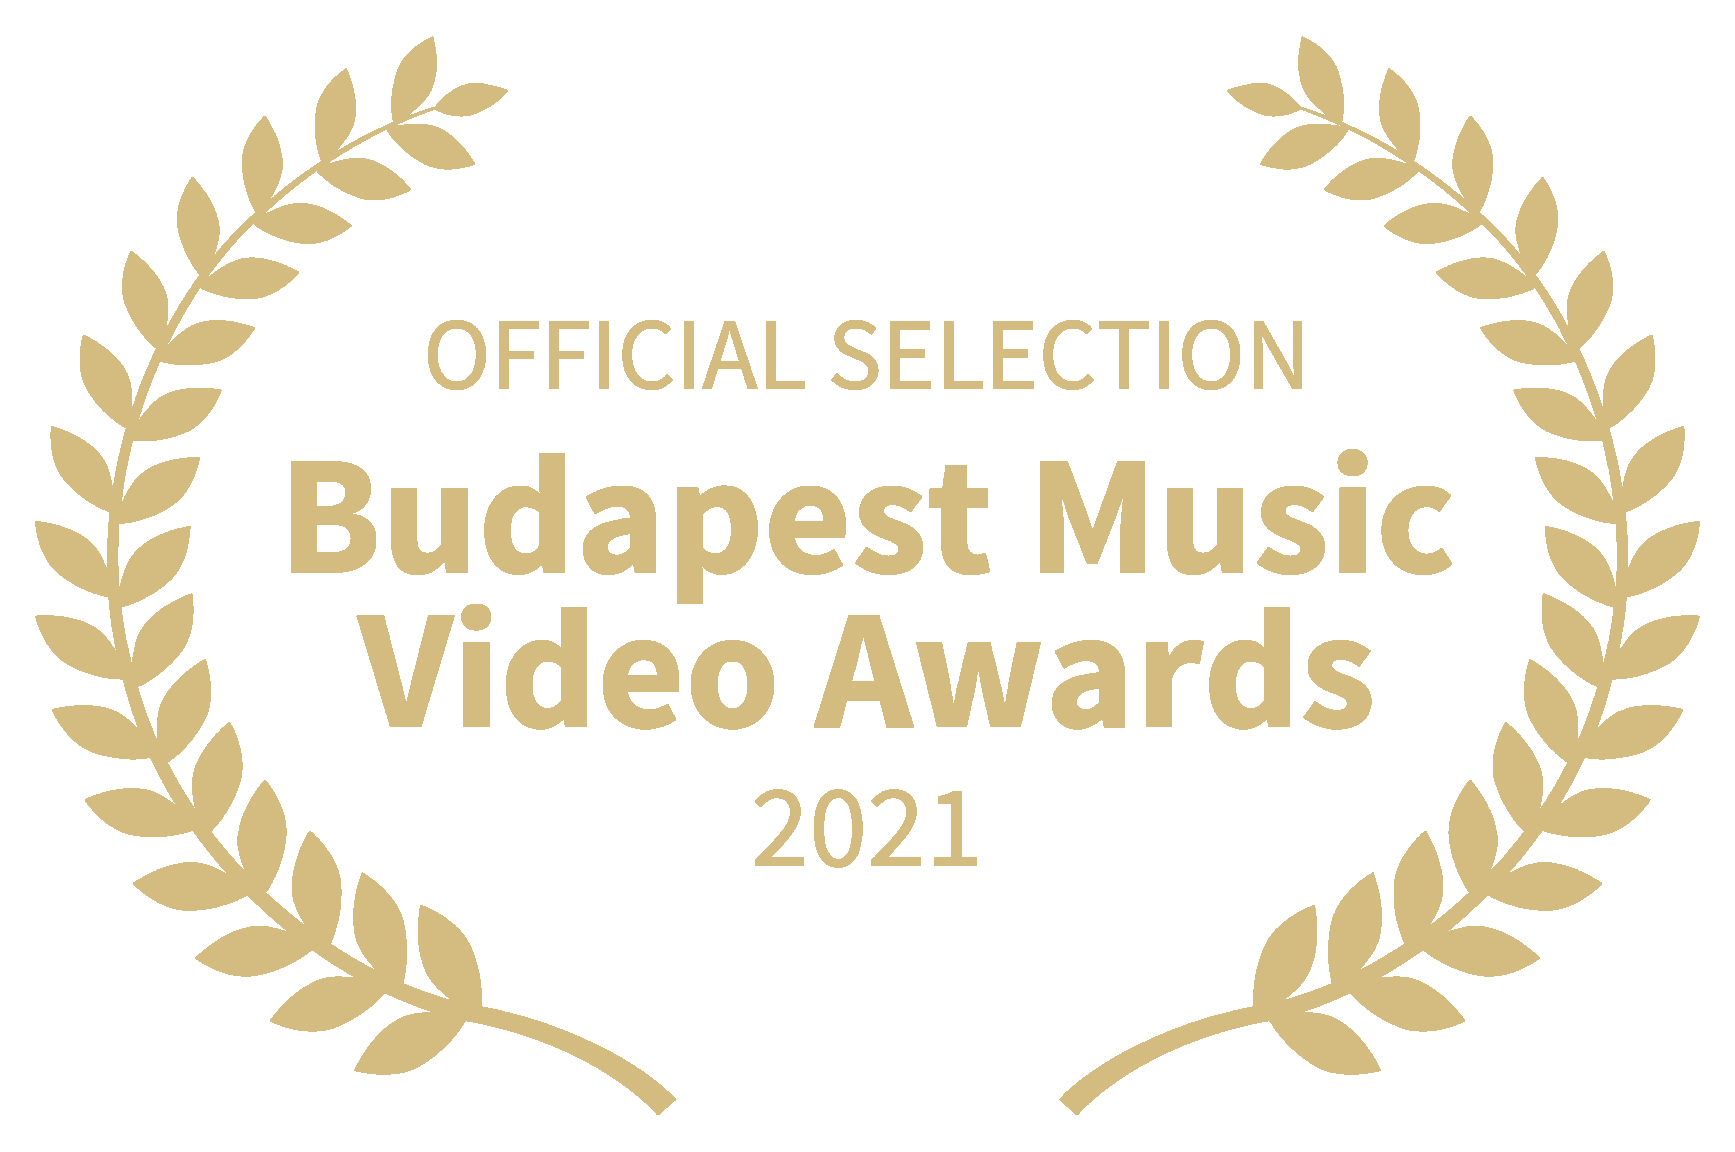 OFFICIAL SELECTION - Budapest Music Video Awards - 2021